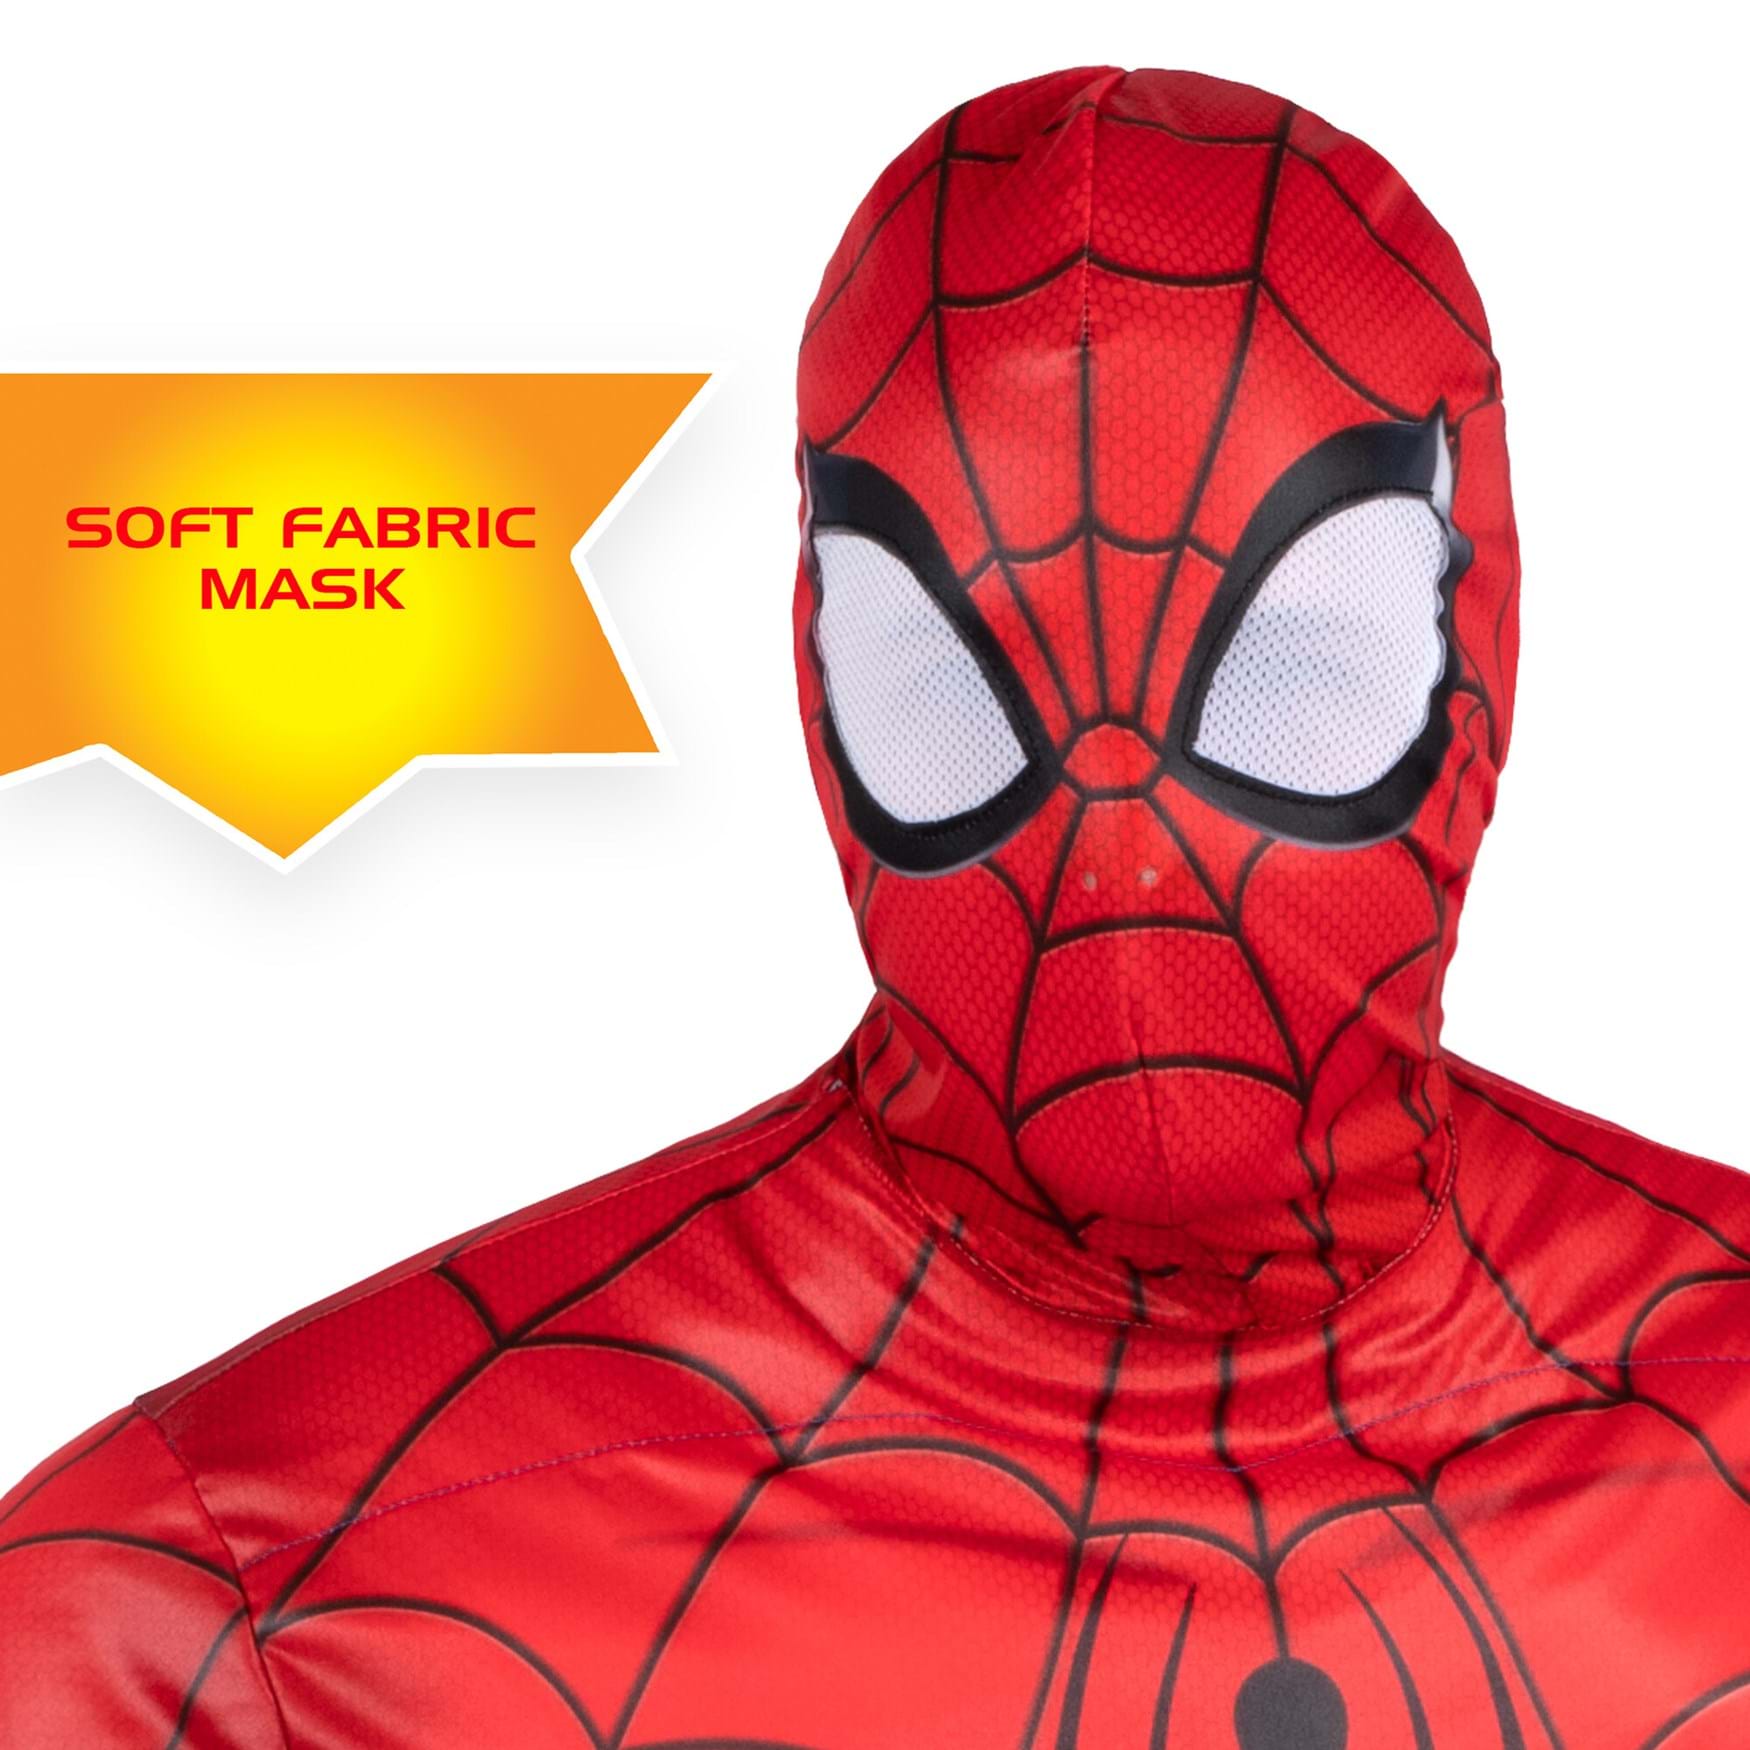 A Must-Have Gifts for Spider-Man Fans - Whispered Inspirations